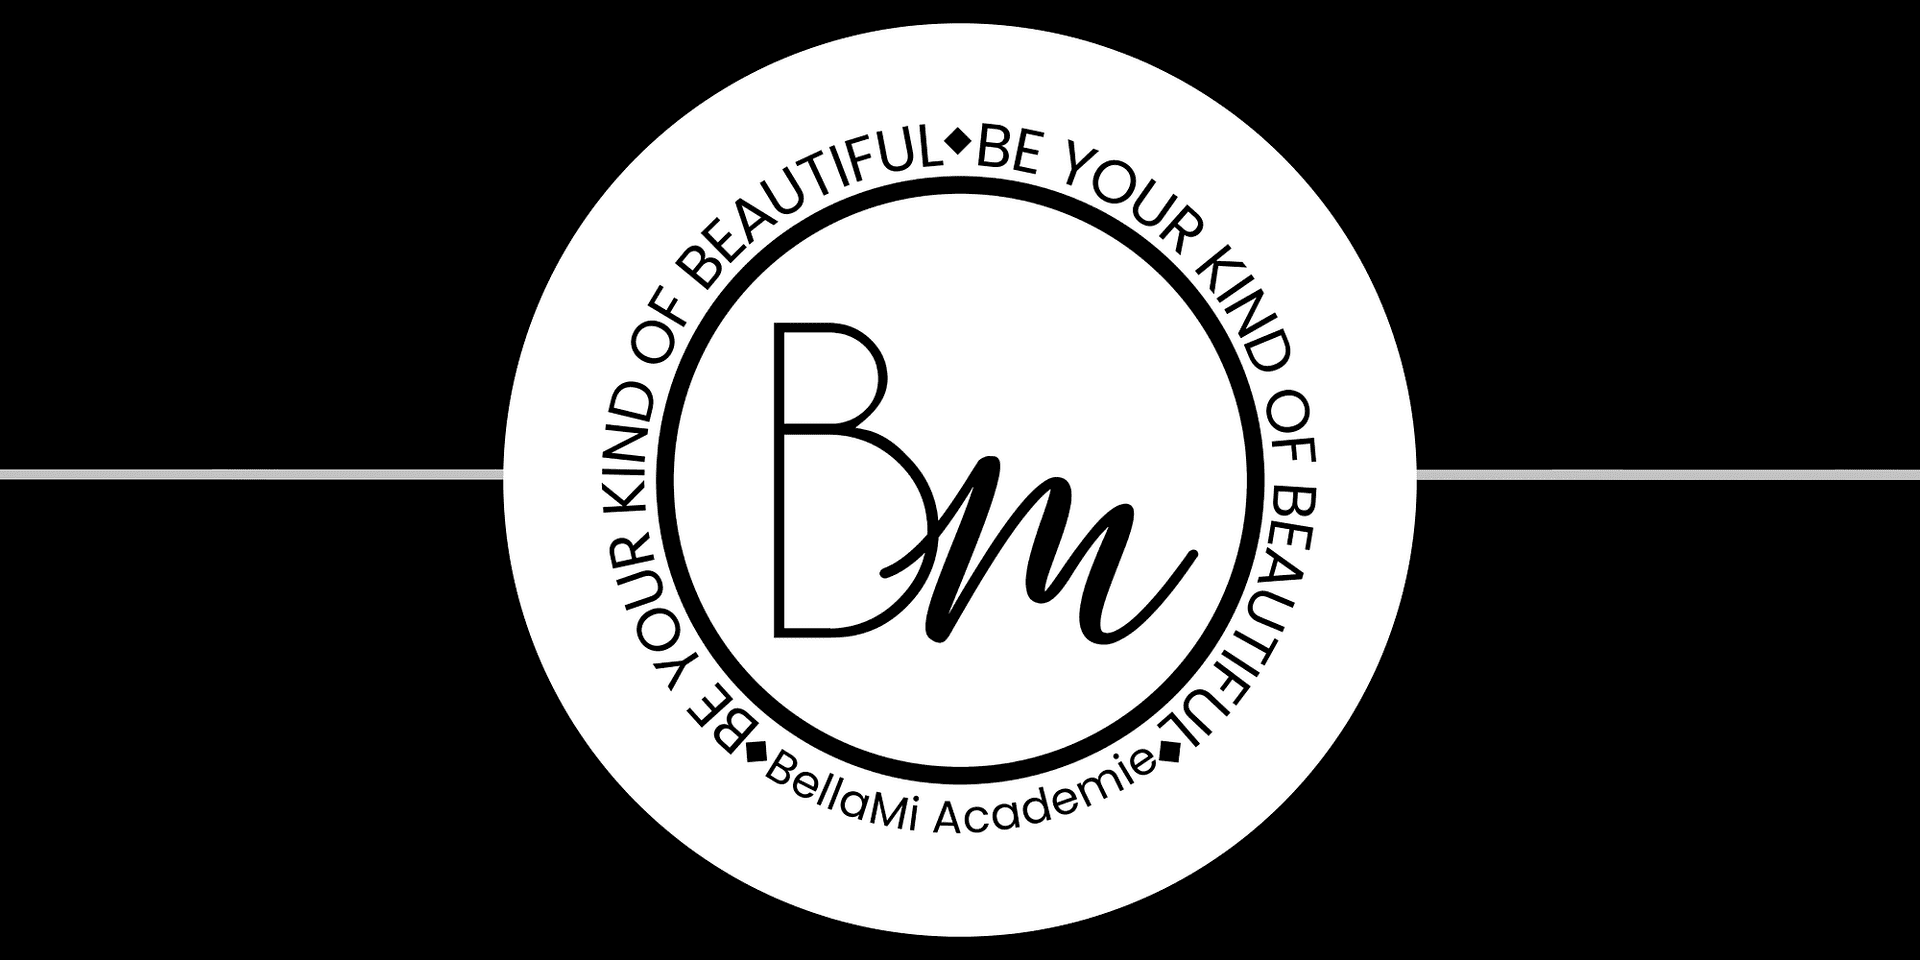 Logo of "BM" with the motto "Be Your Kind of Beautiful" in a circular design.